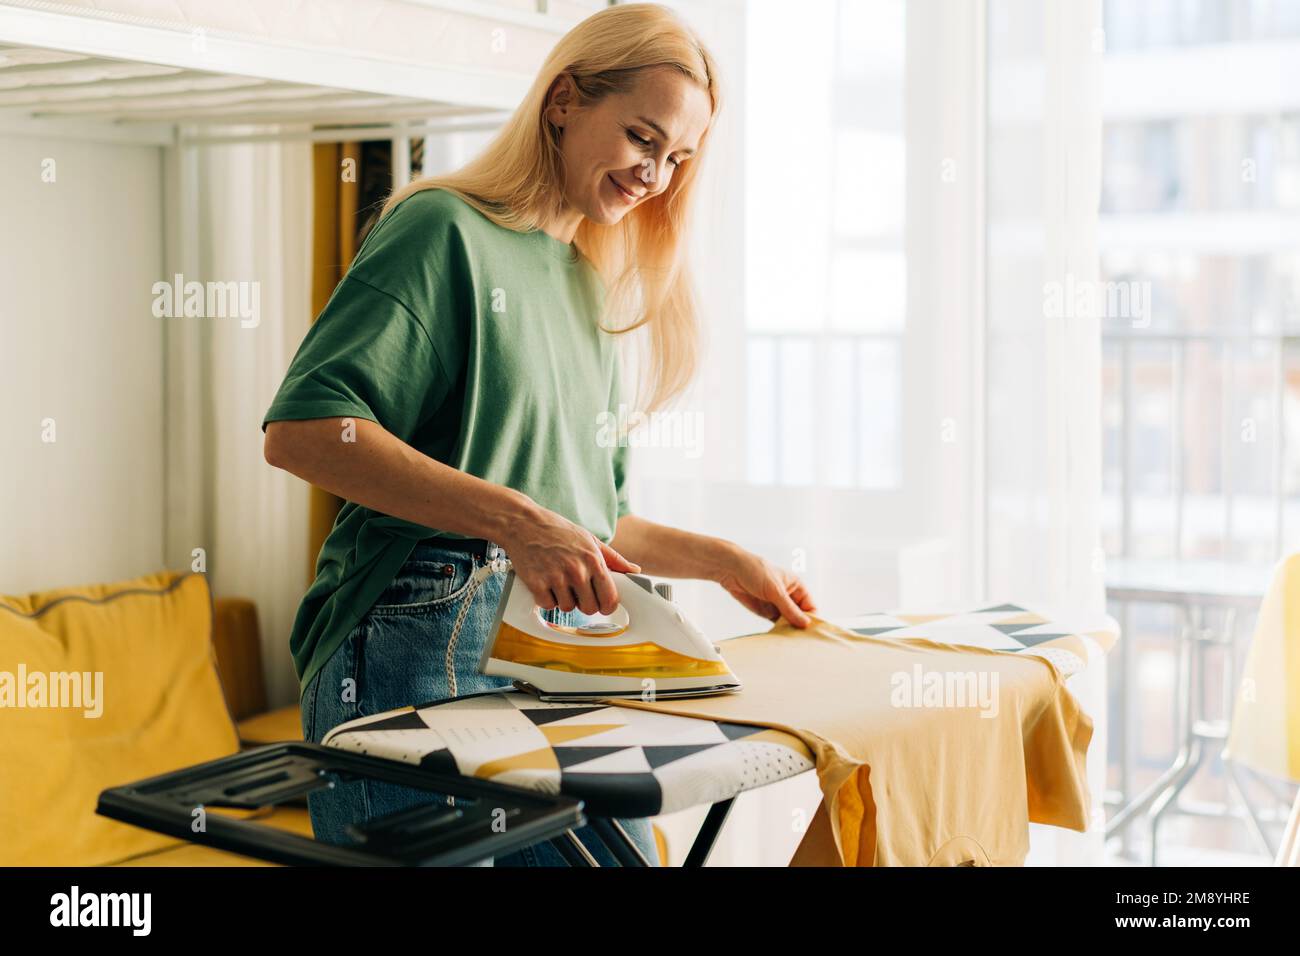 Middle-aged woman housewife ironing clothes at home. Stock Photo